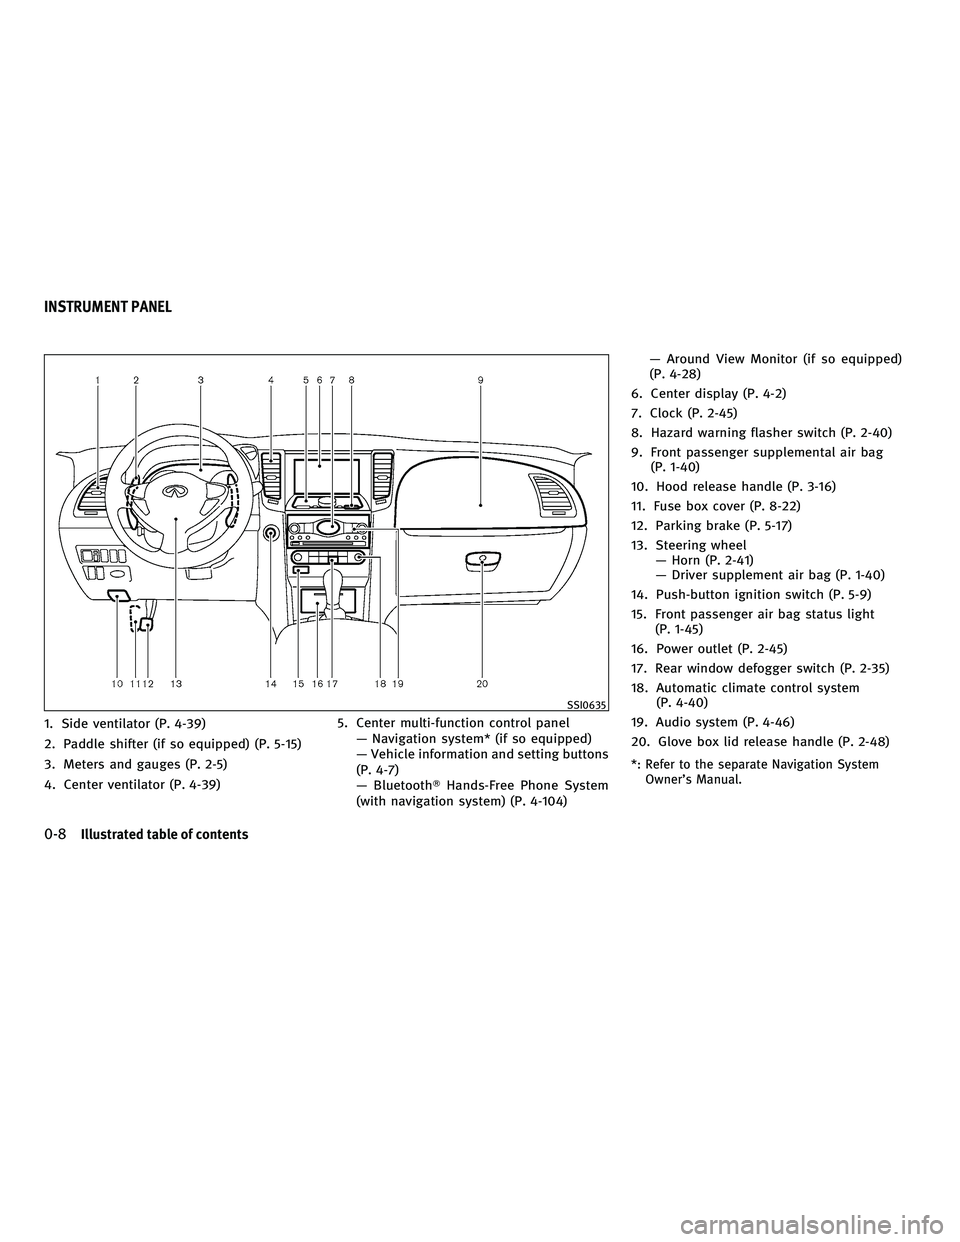 INFINITI FX 2010  Owners Manual 1. Side ventilator (P. 4-39)
2. Paddle shifter (if so equipped) (P. 5-15)
3. Meters and gauges (P. 2-5)
4. Center ventilator (P. 4-39)5. Center multi-function control panel
— Navigation system* (if 